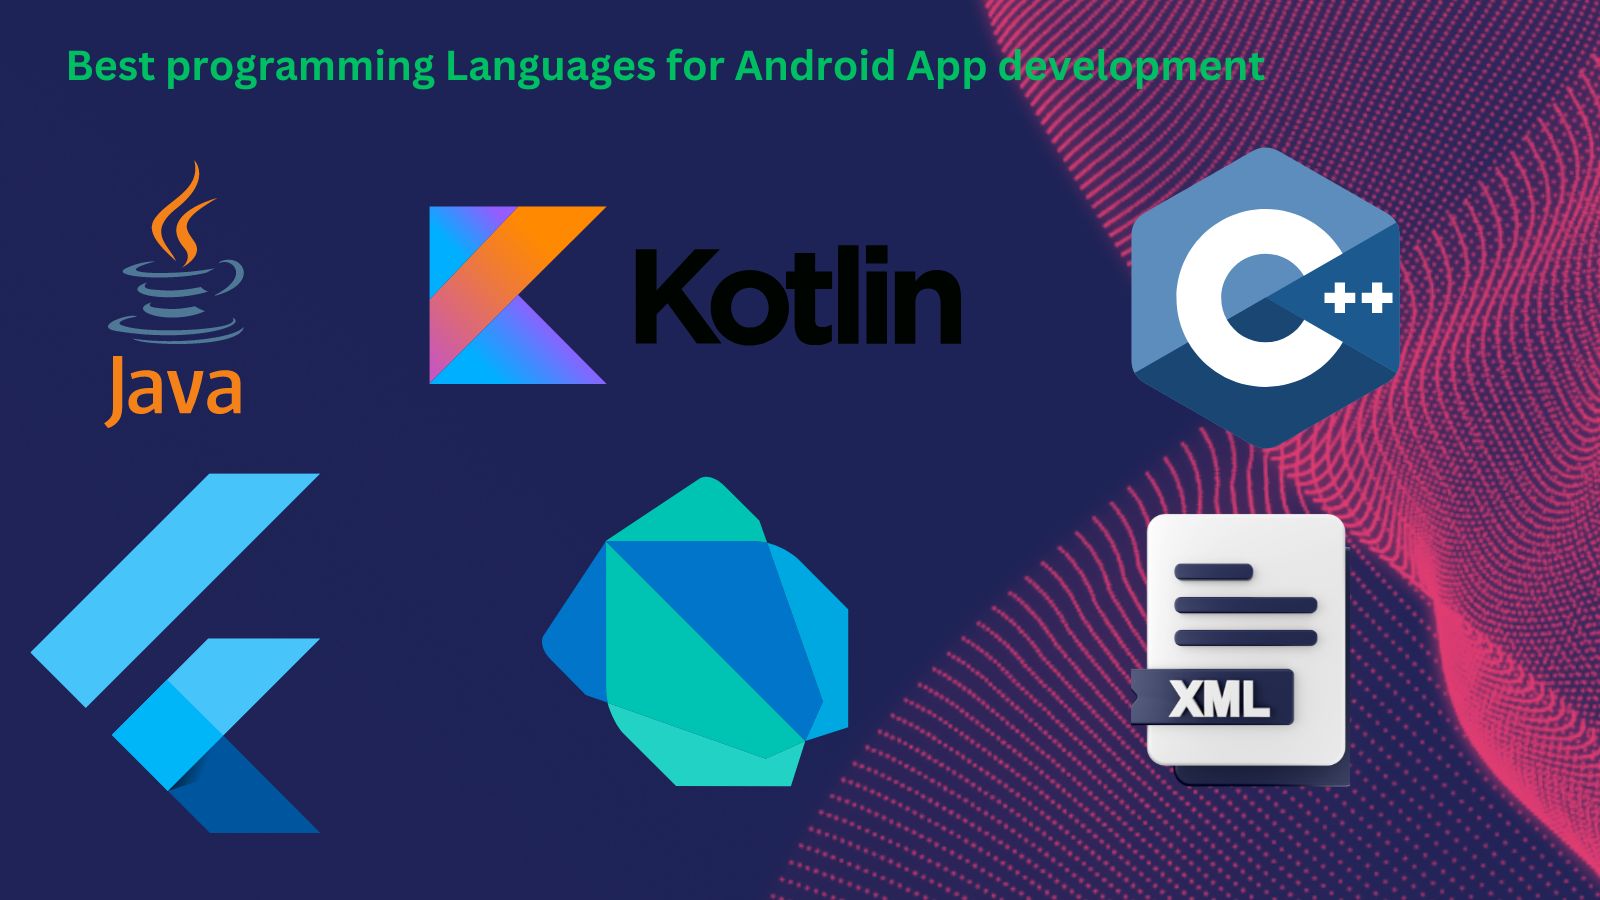 Which programming languages are used to create Android Apps?